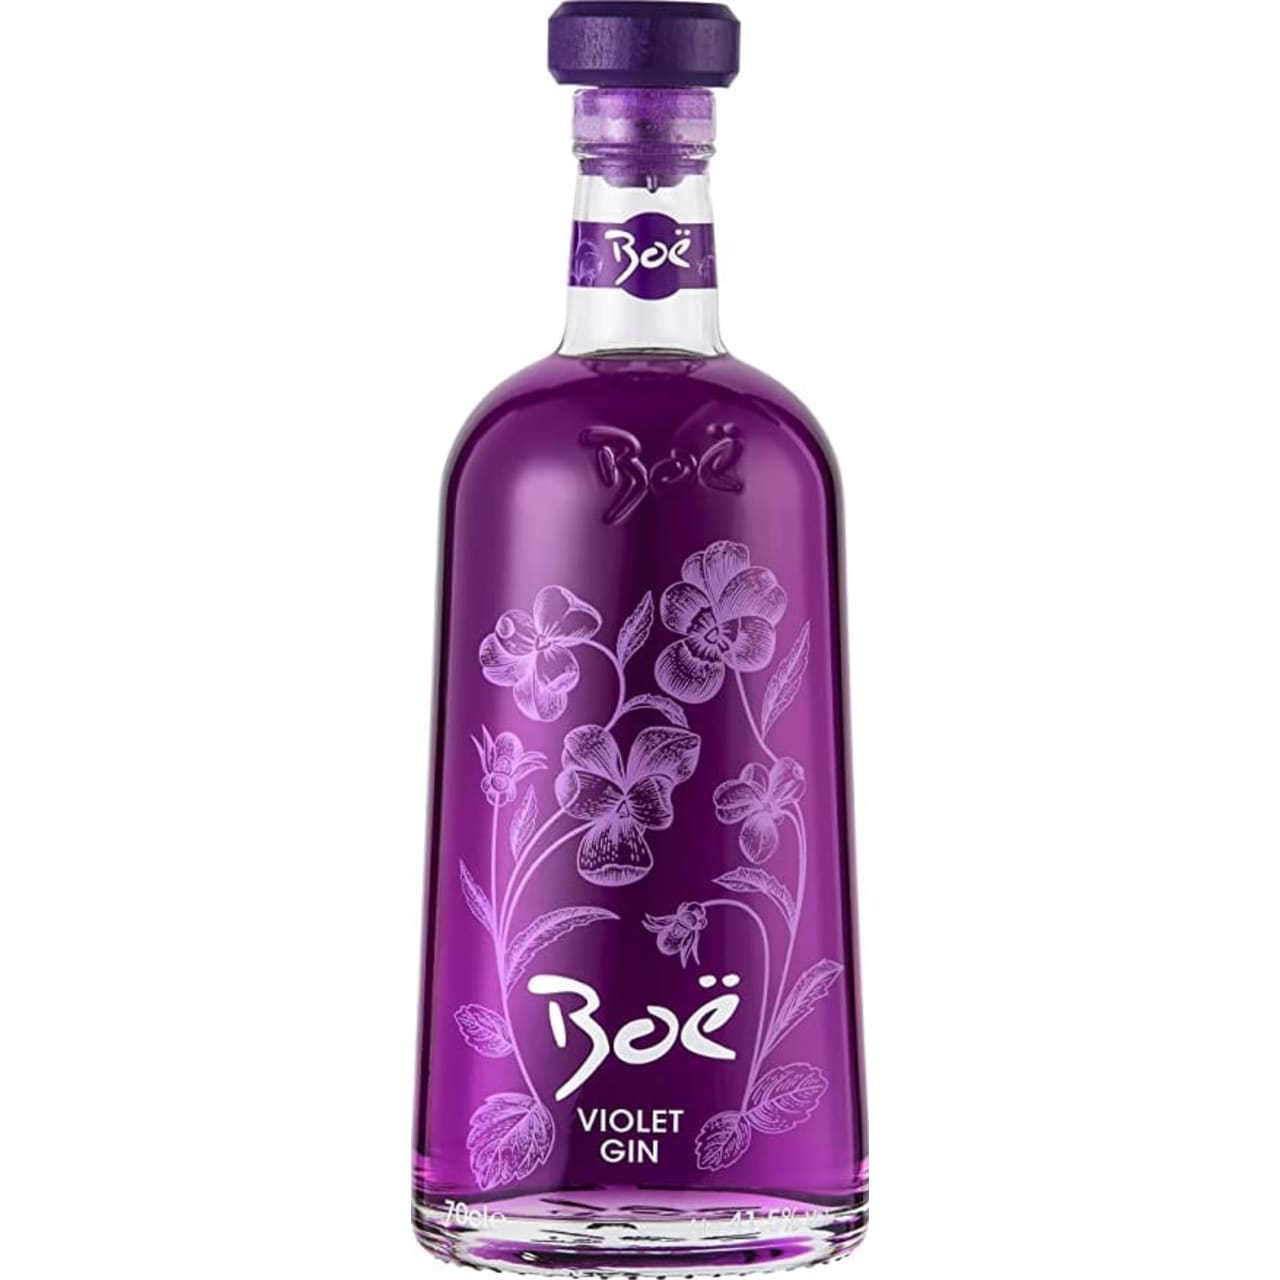 The addition of violets creates a stylish gin with a light, delicate taste and beautiful colour and aroma.